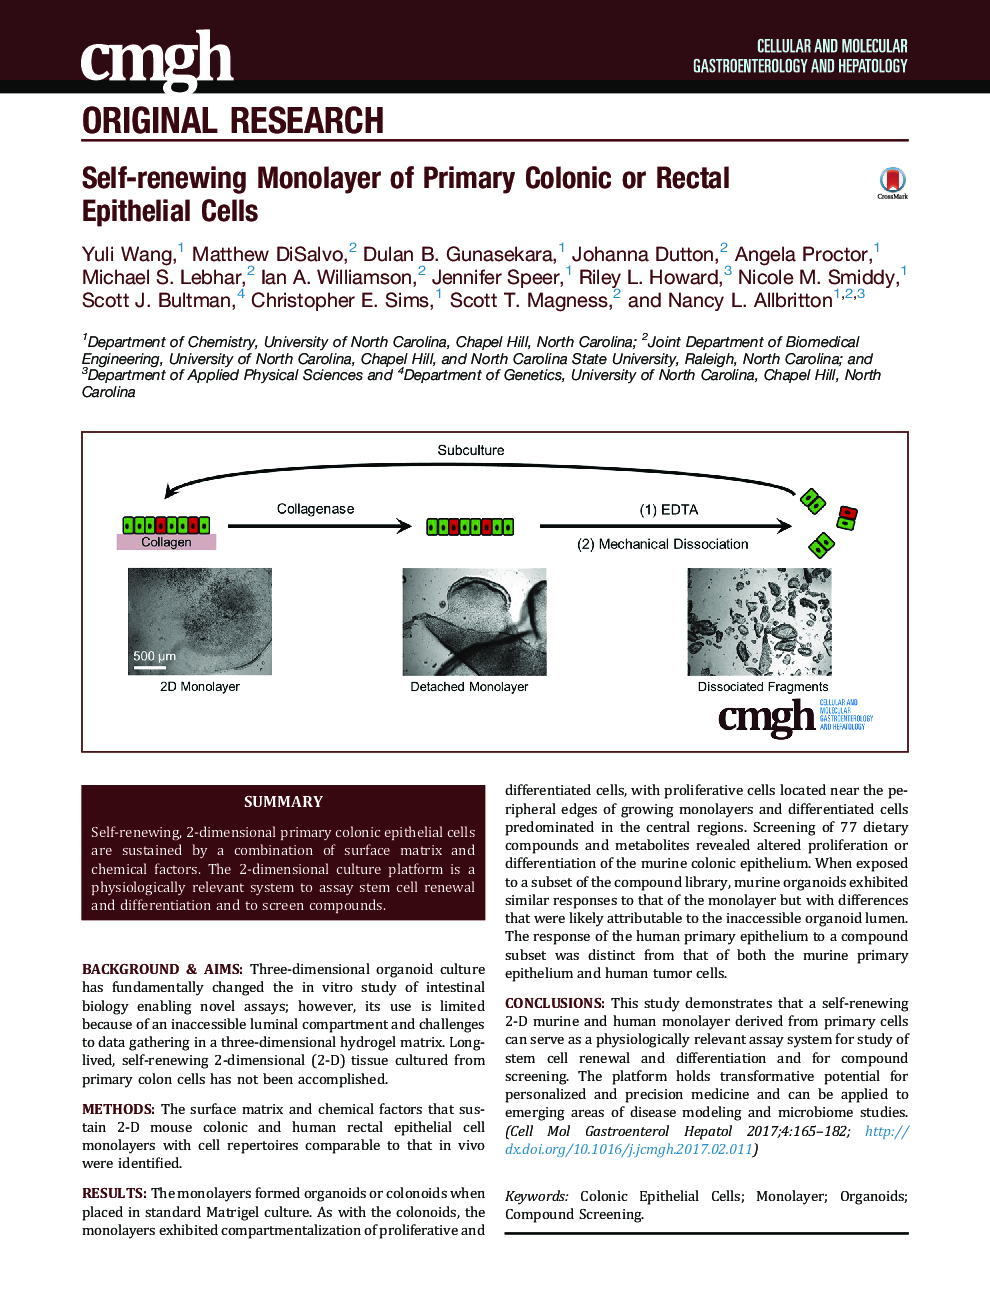 Self-renewing Monolayer of Primary Colonic or Rectal Epithelial Cells